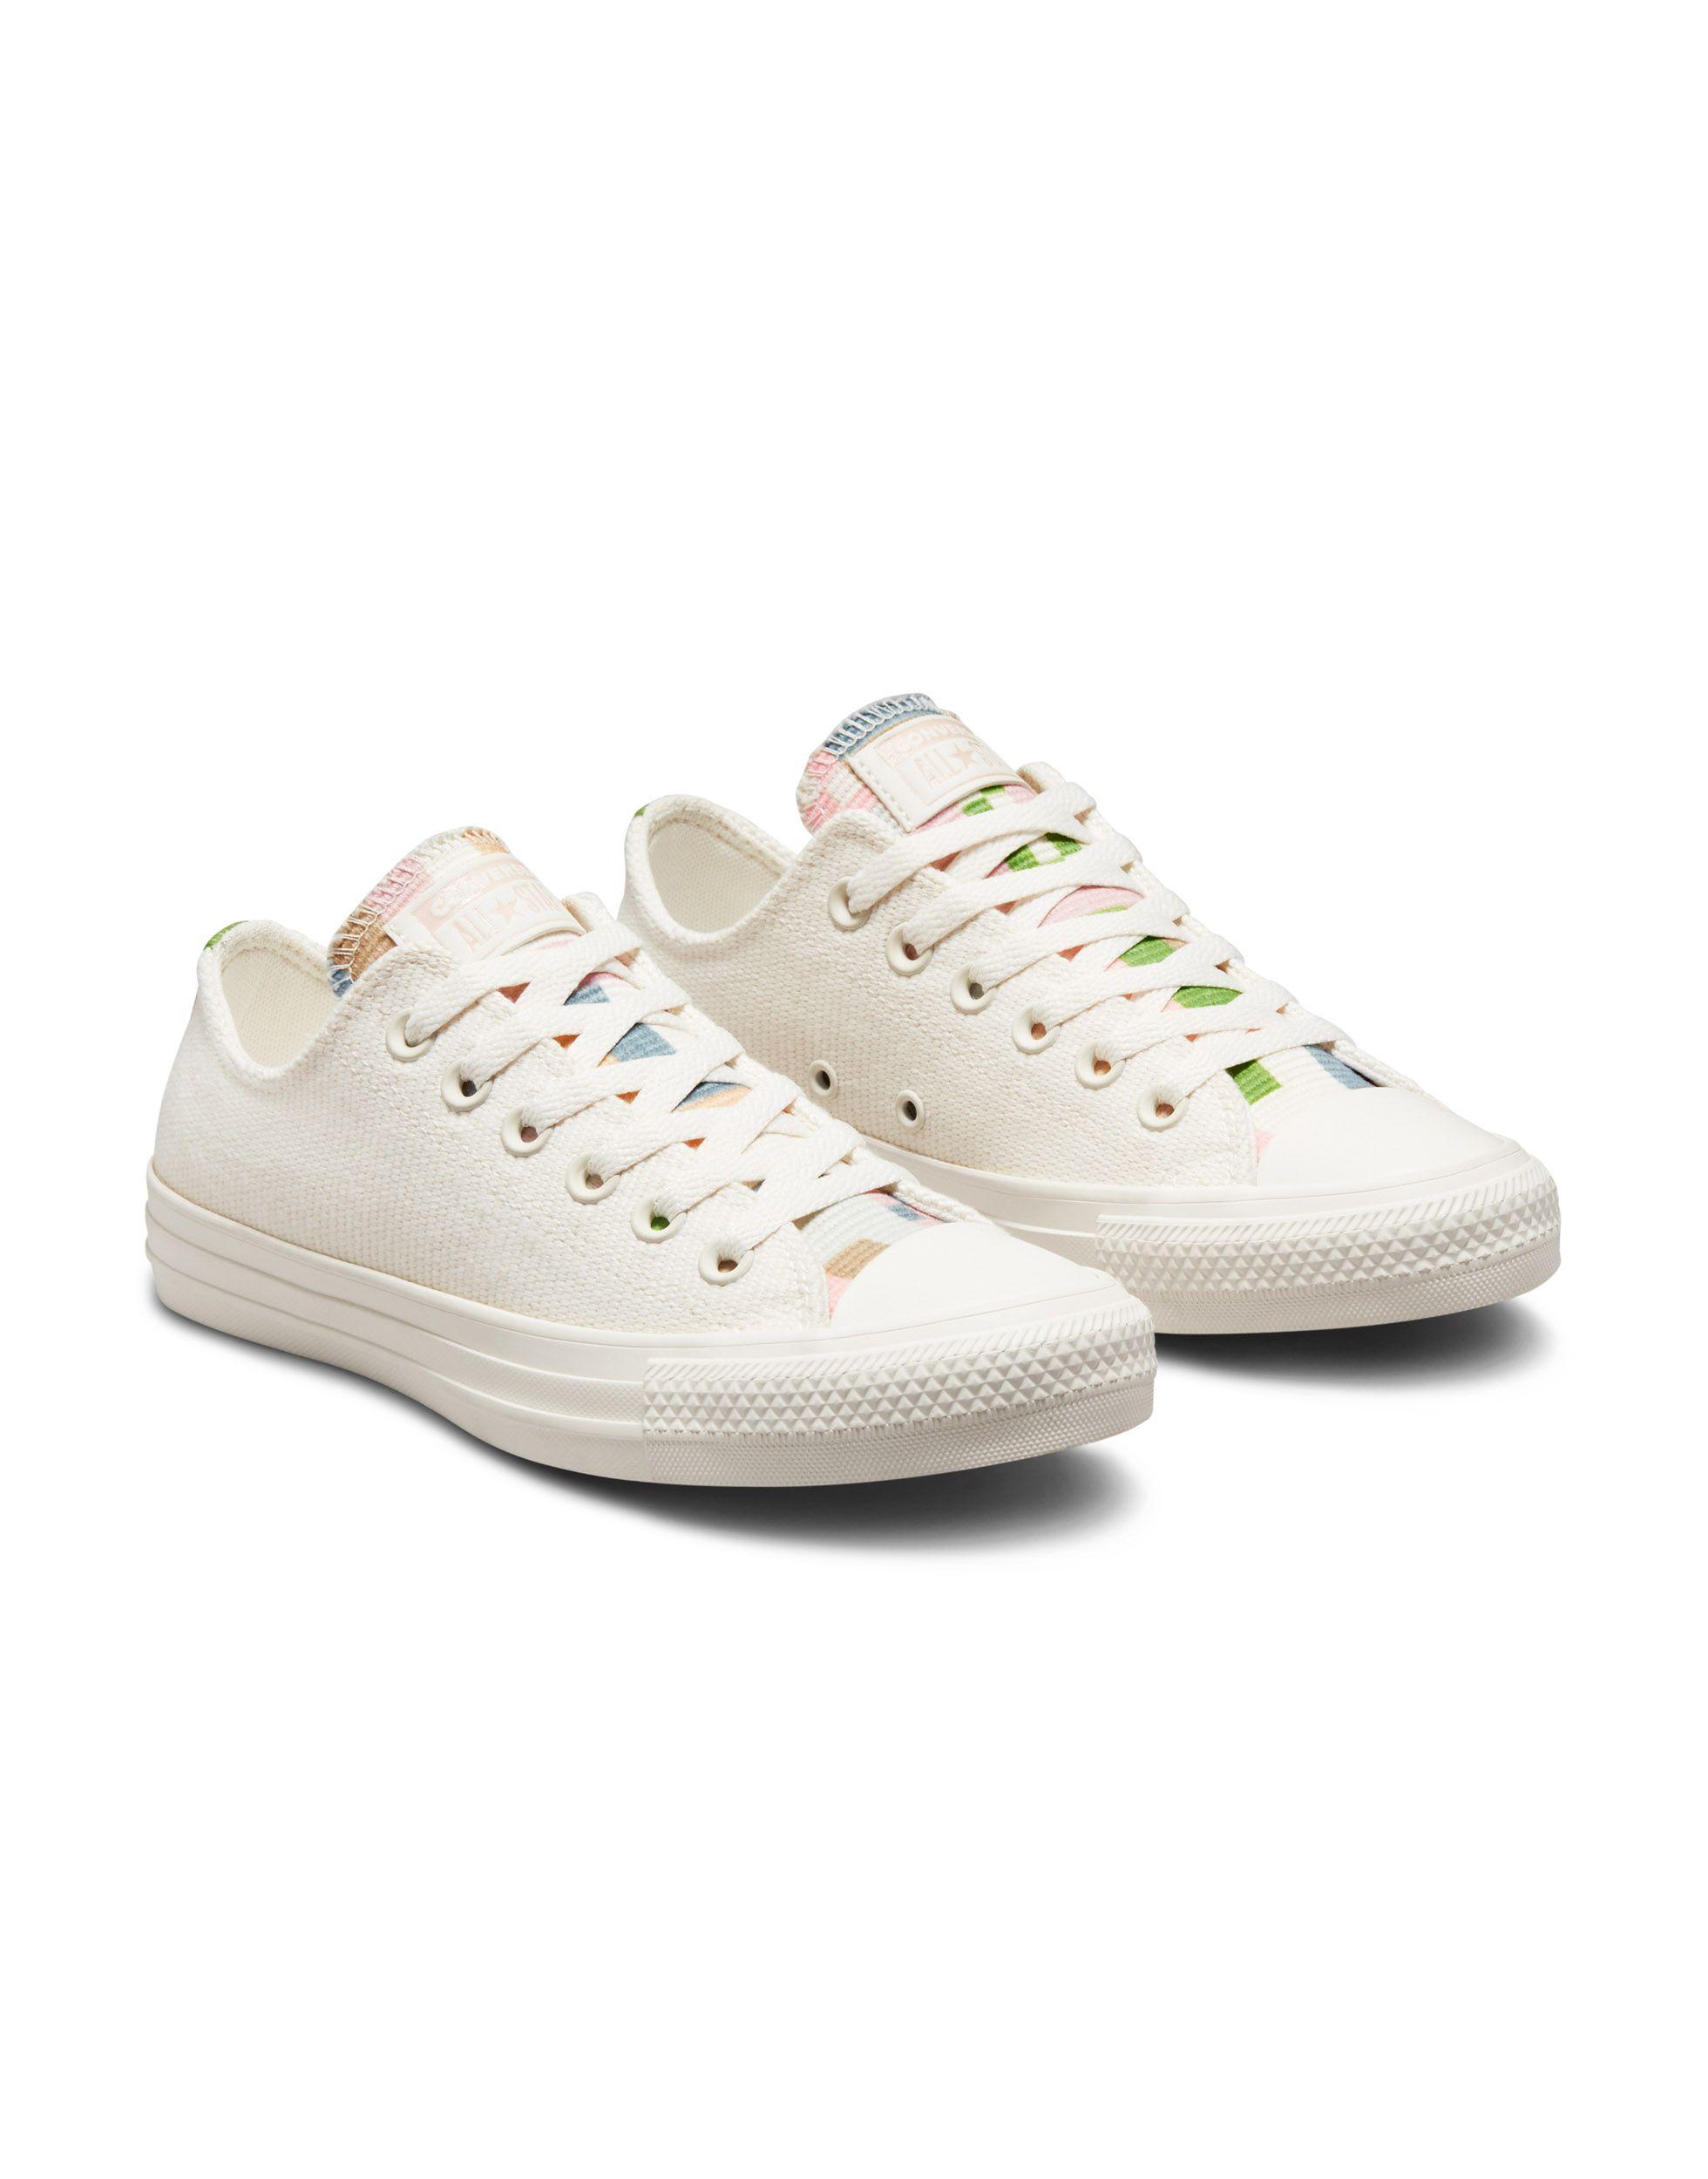 Converse Taylor All Star Crafted Folk Canvas Sneakers in White | Lyst